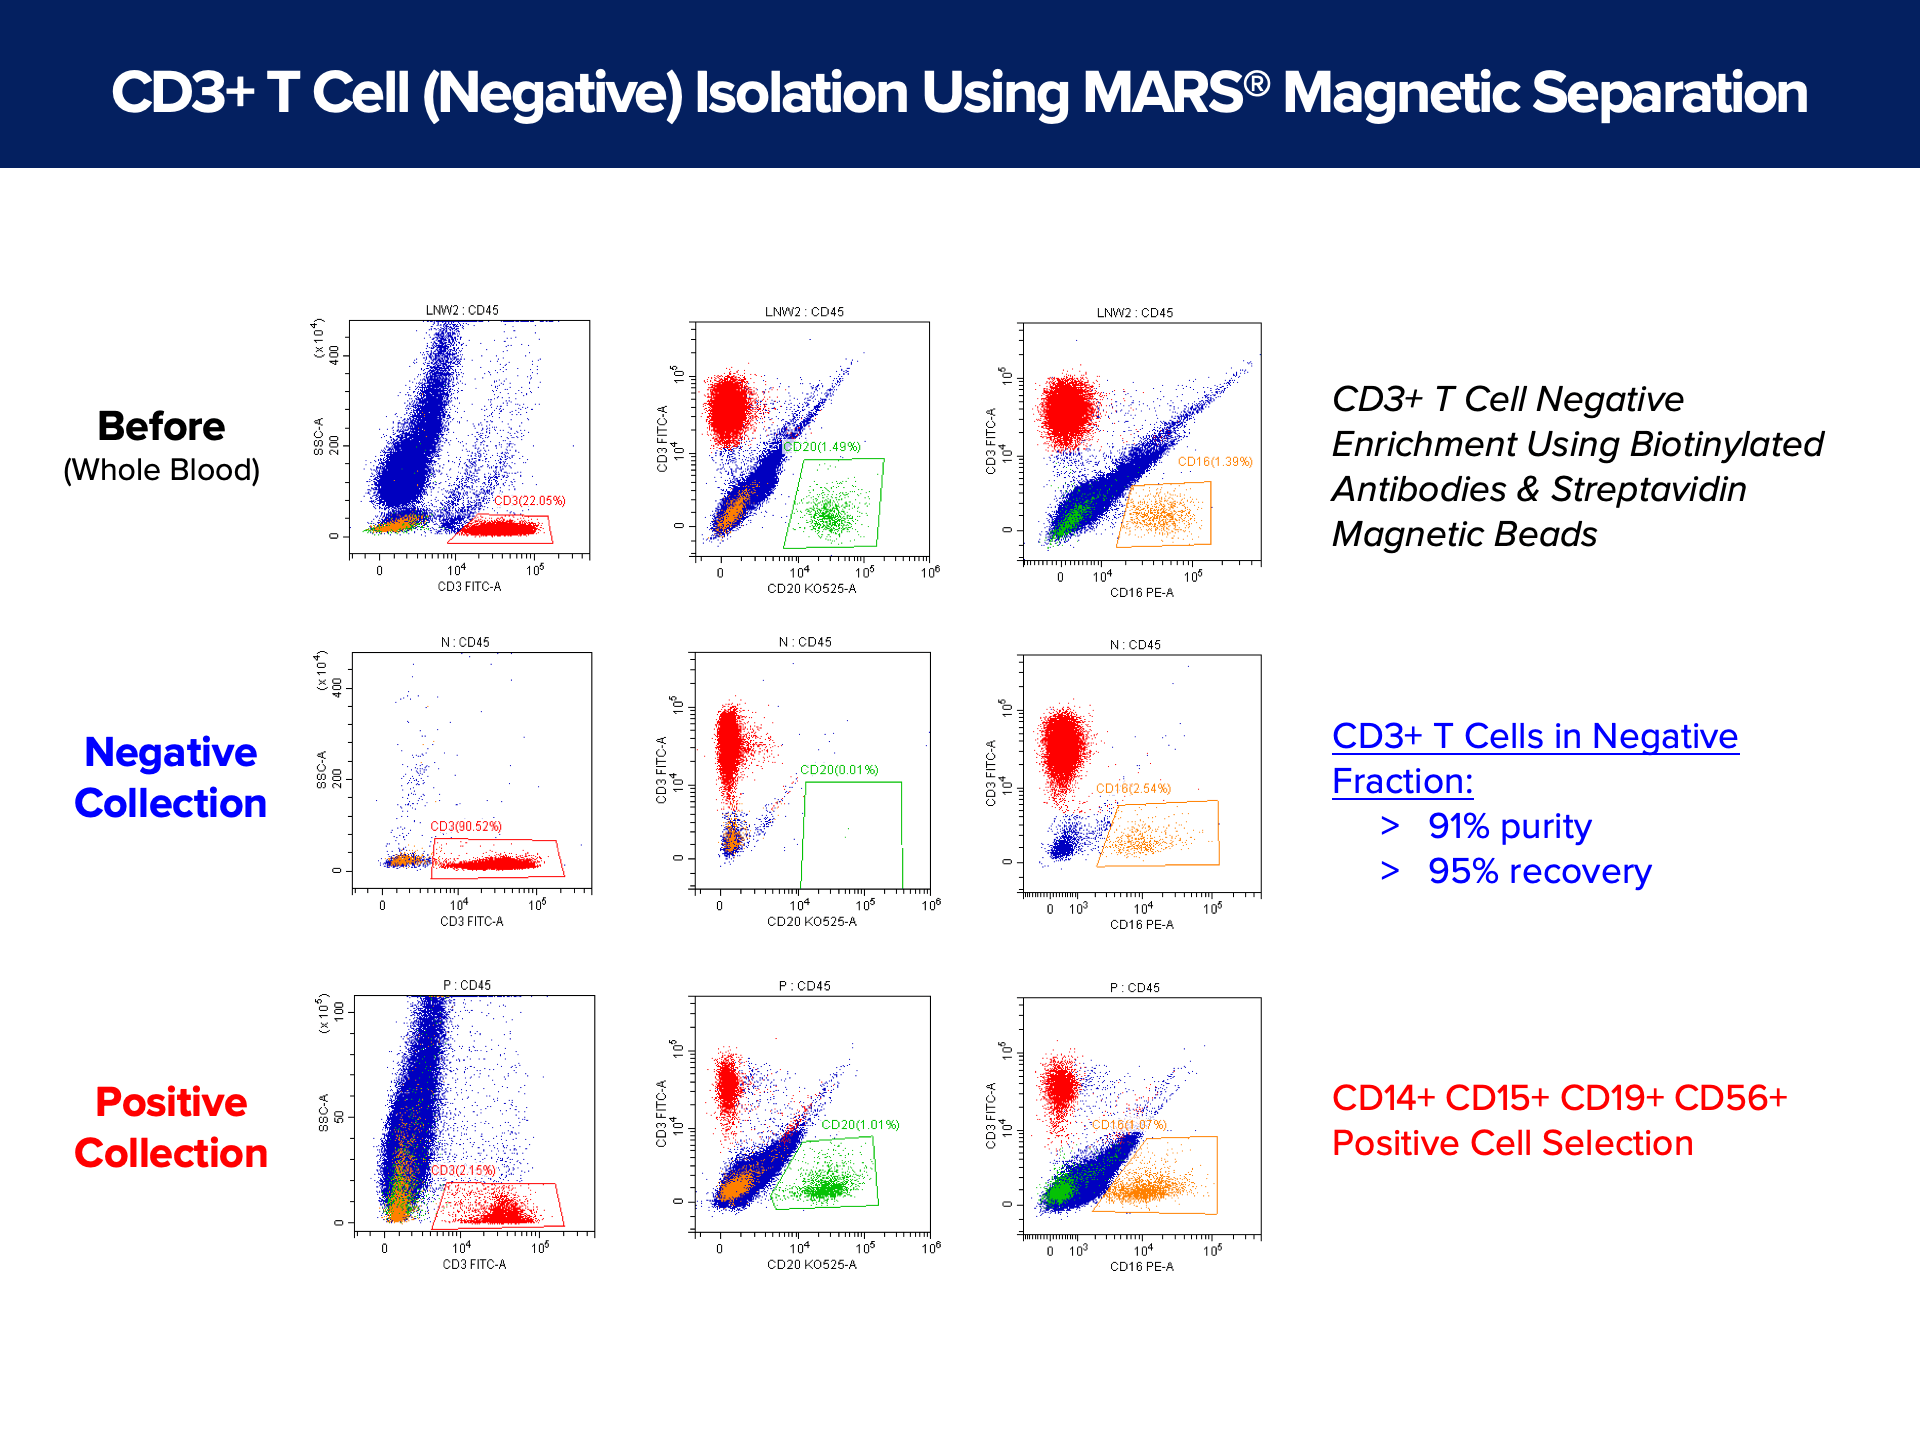 CD3+ T Cell (Negative) Isolation Using MARS® Magnetic Separation